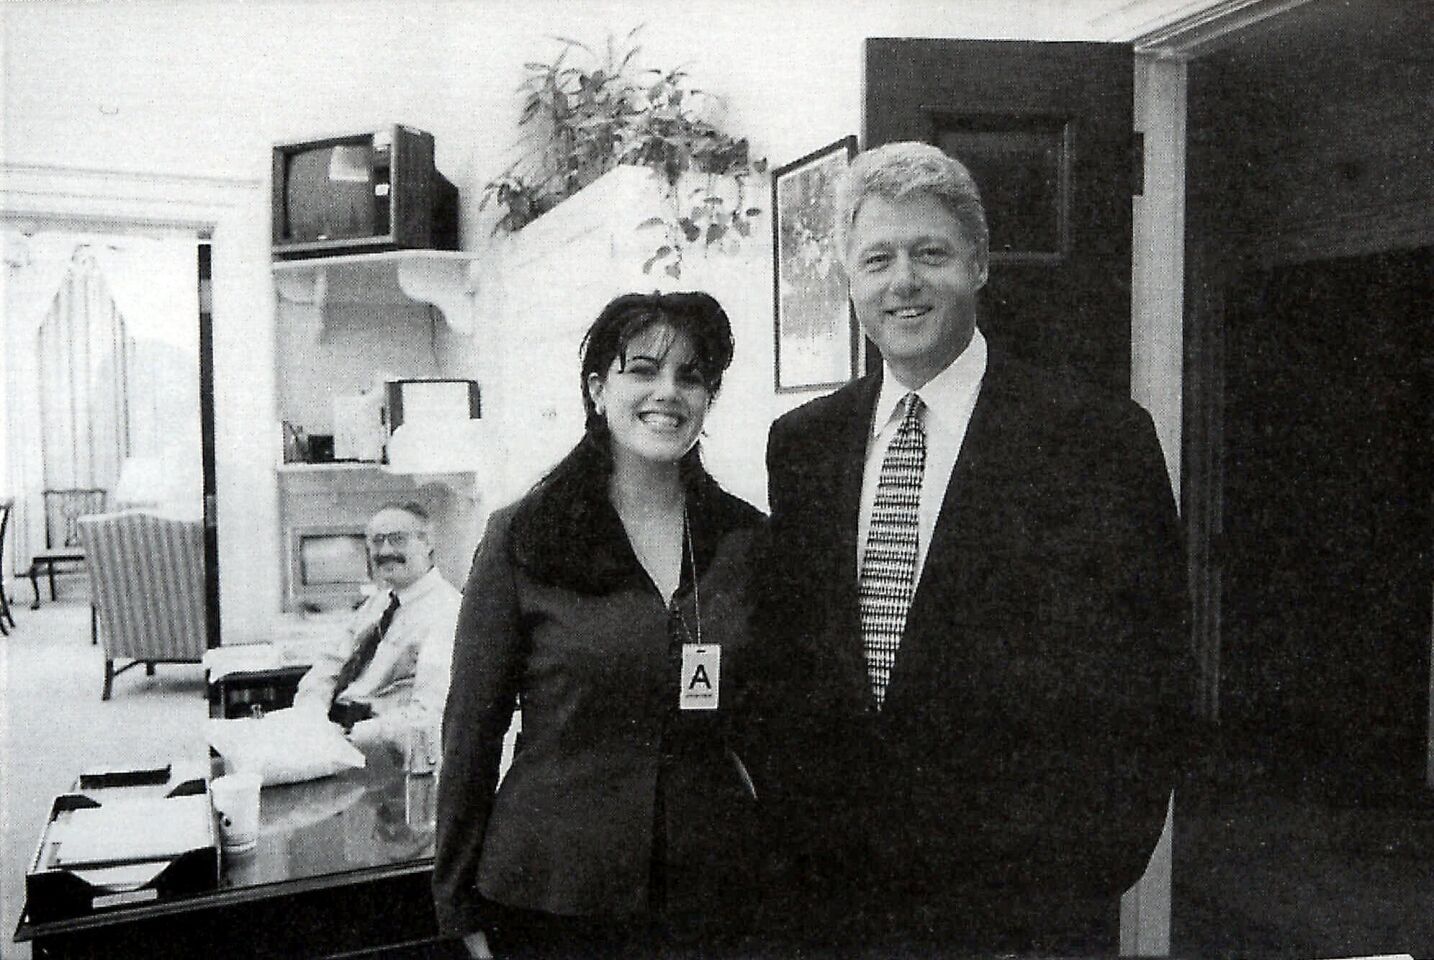 President Clinton overcame sex scandals involving Gennifer Flowers (that one nearly derailed his first presidential campaign) and Paula Jones. The latter affair led -- in a wondrously roundabout way, thank you Ken Starr! -- to his impeachment. But the Senate didn't convict him and he has remained a darling of Democrats. But his most famous sexual misstep was with White House intern Monica Lewinsky, which nearly cost him as marriage as well. Lewinsky hasn't done too bad for herself, though. Among other things, she got a reported $12 million for her memoir. She also attended the Oscars with Sir Ian McKellan, was a spokeswoman for Jenny Craig, hosted a reality show, was a correspondent for a British news program and sold a line of handbags.